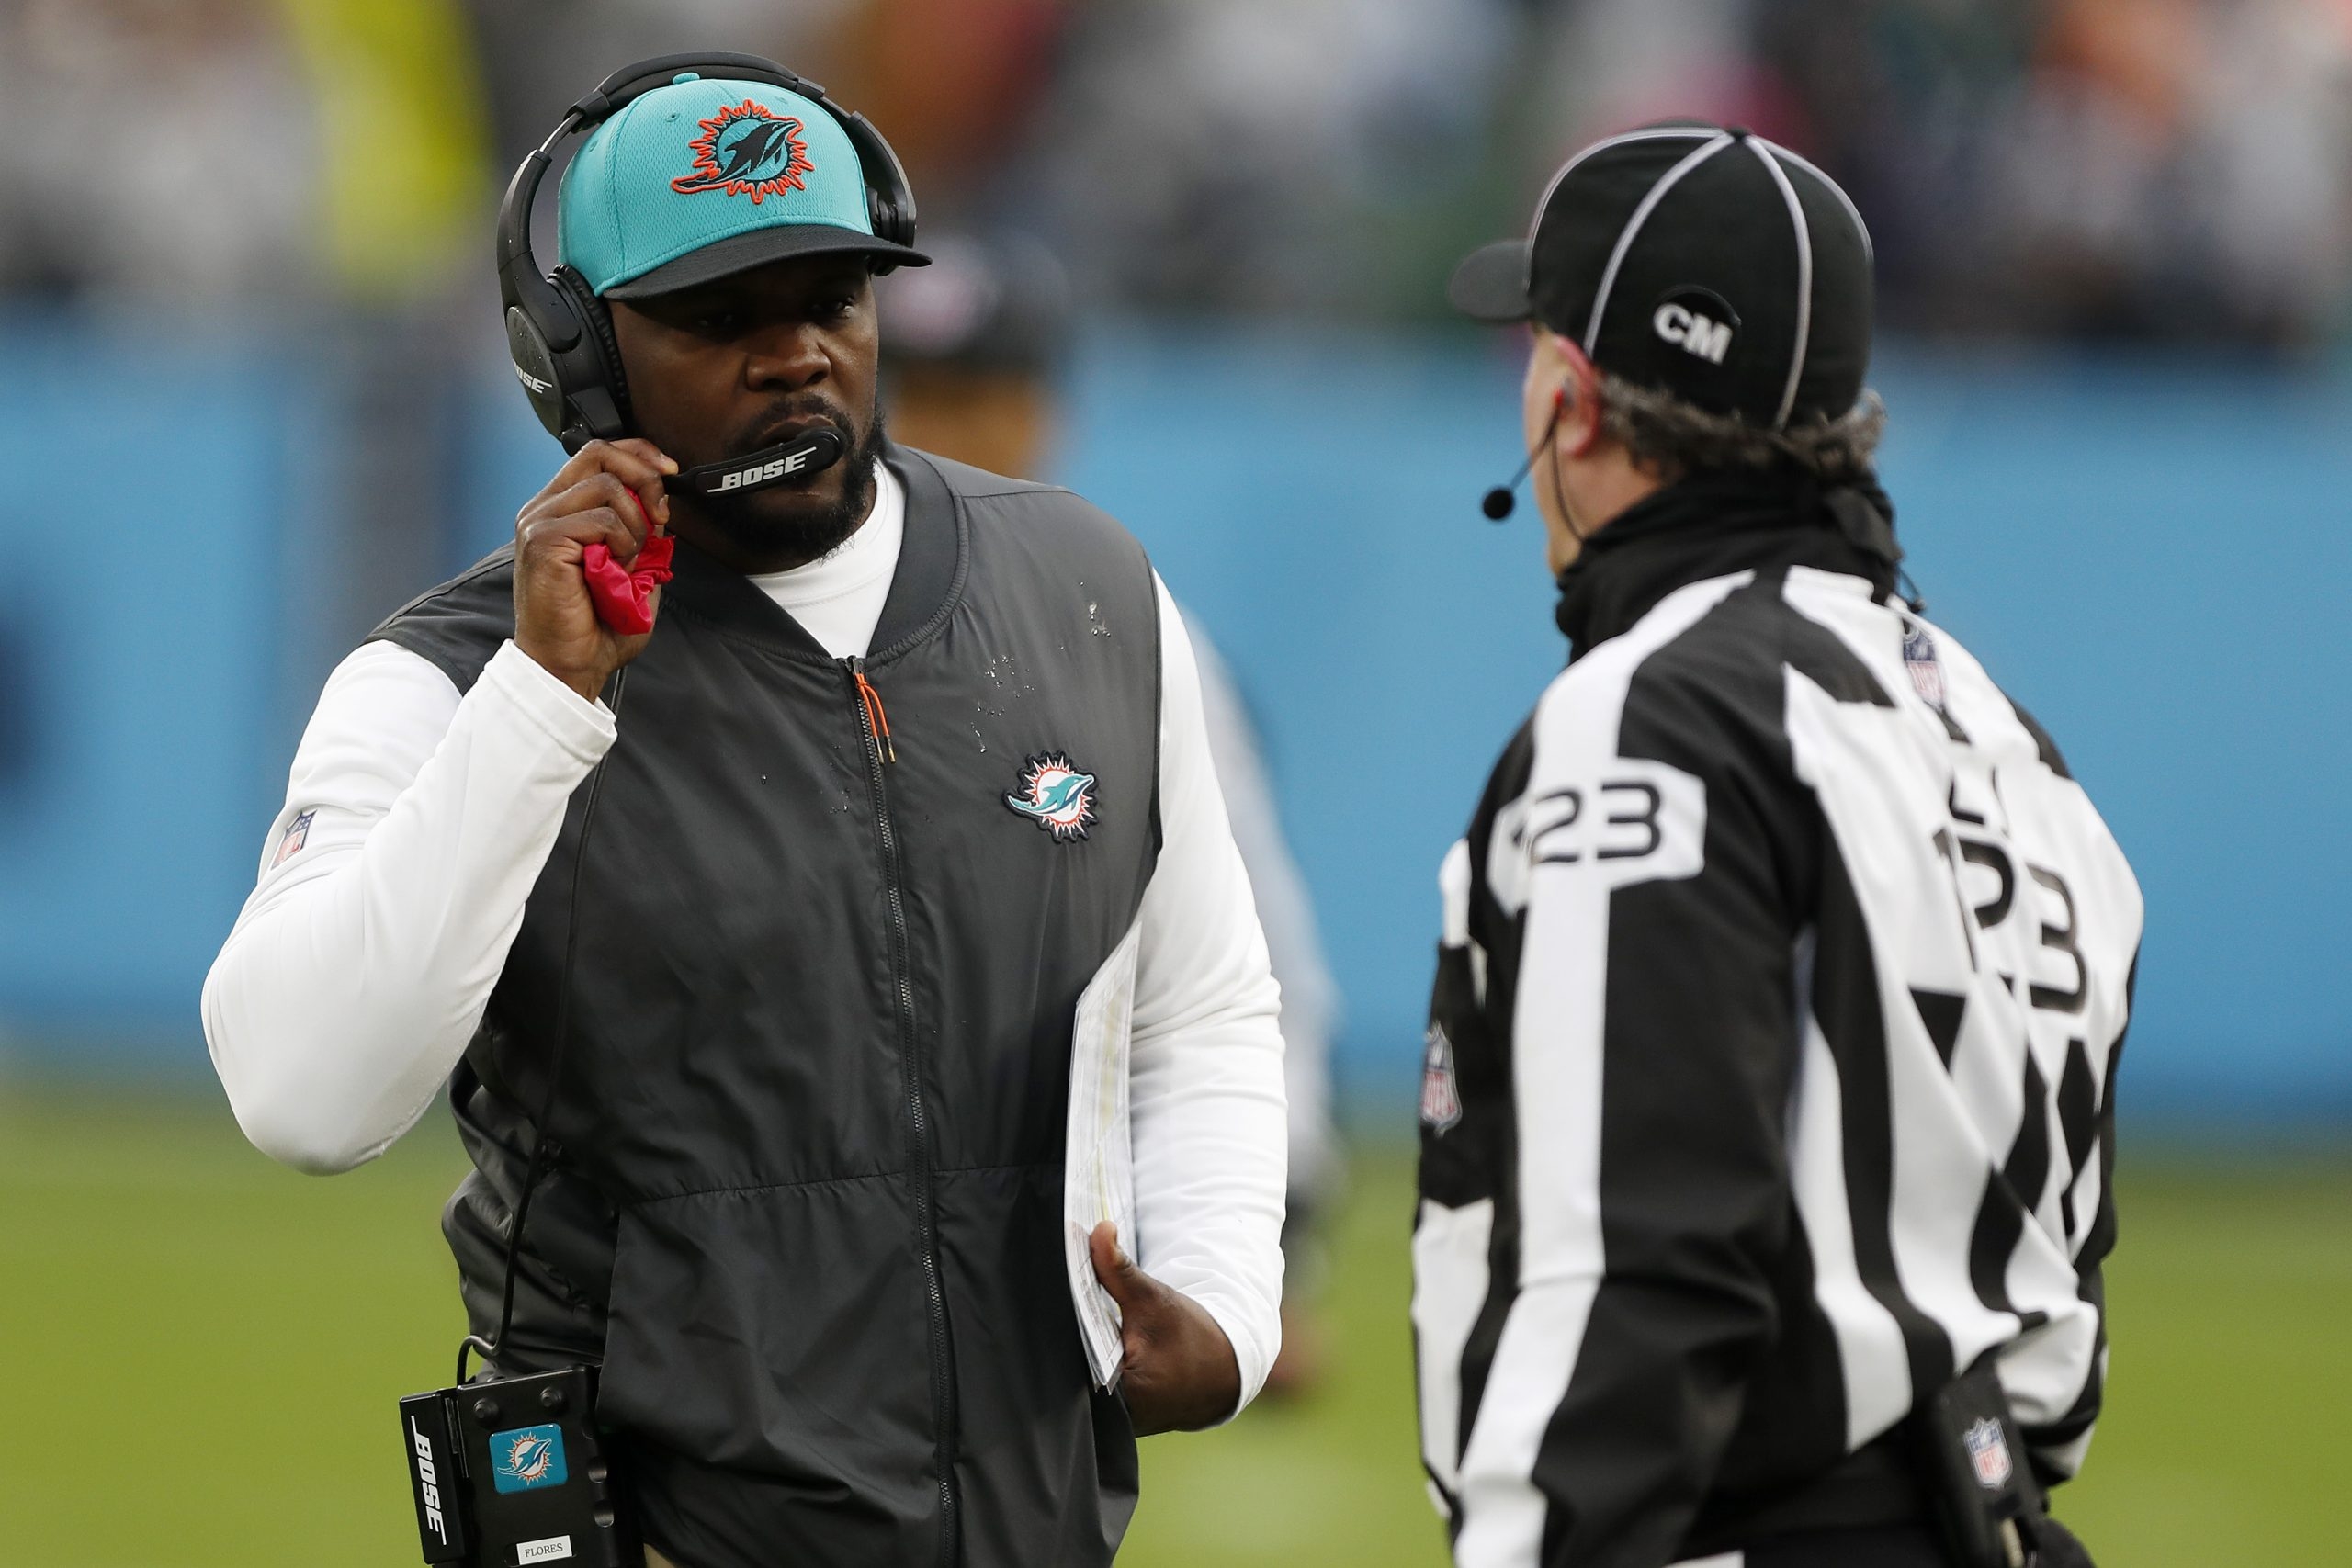 Poll: Should the Miami Dolphins have fired Brian Flores?